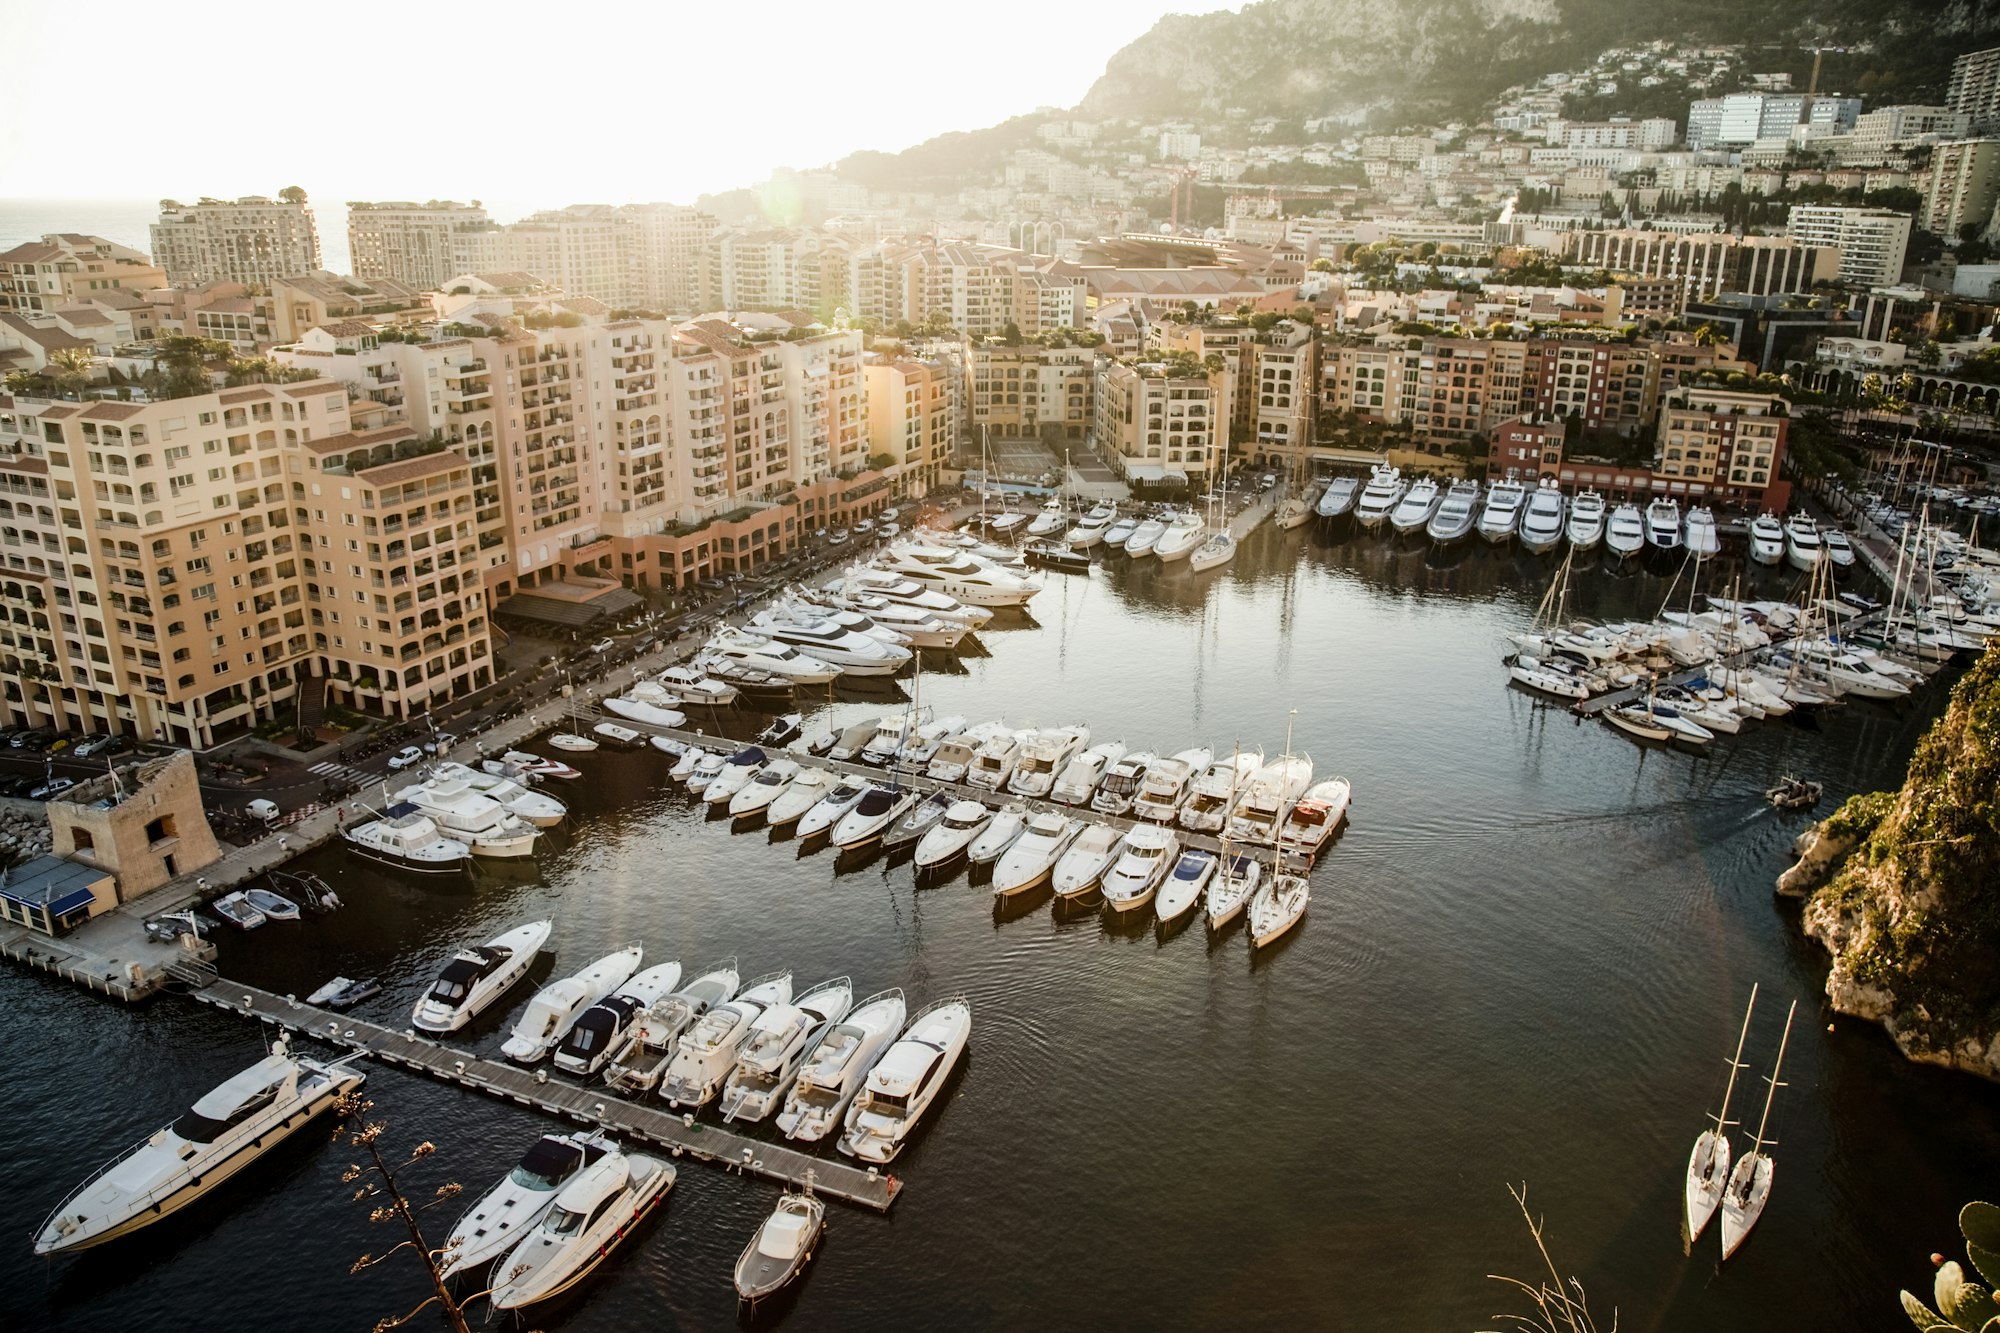 View of marina with yachts and boats, Monte Carlo, Monaco